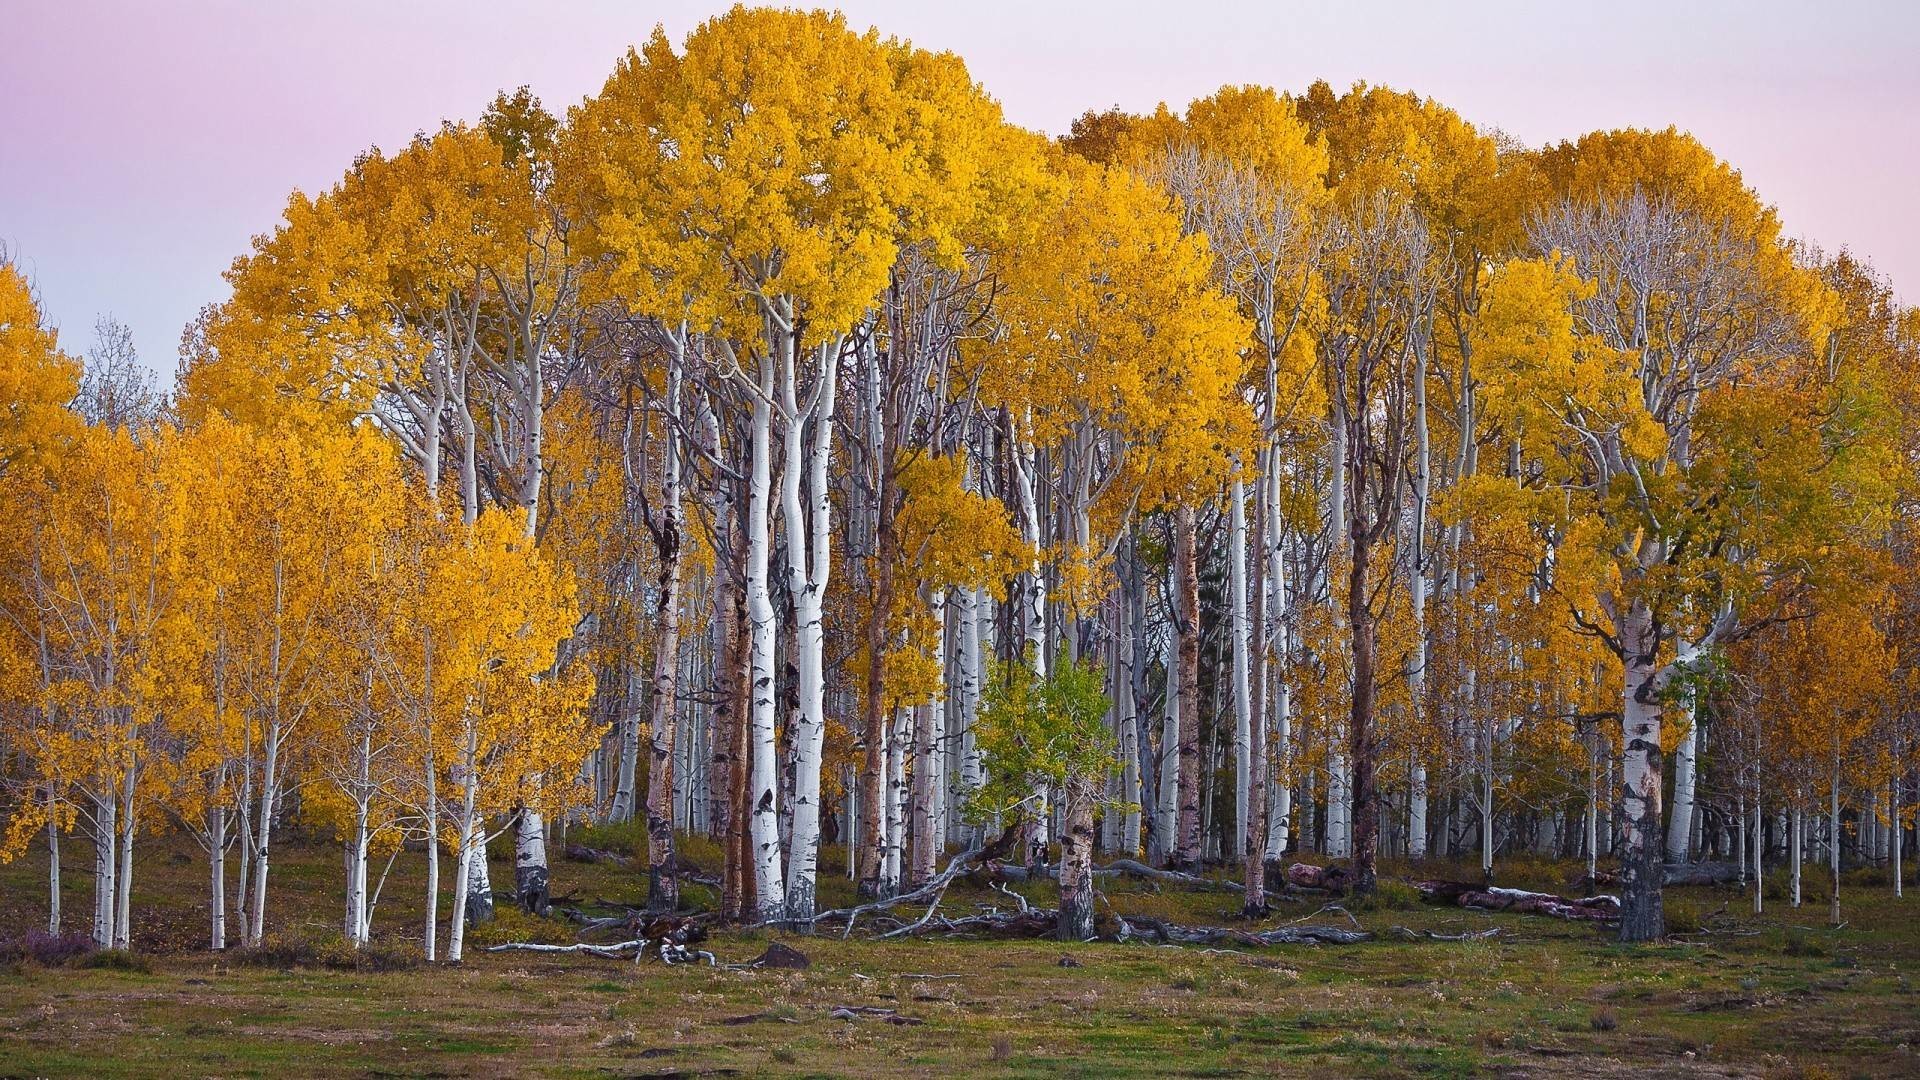 1920x1080 Are these birch or aspen trees?